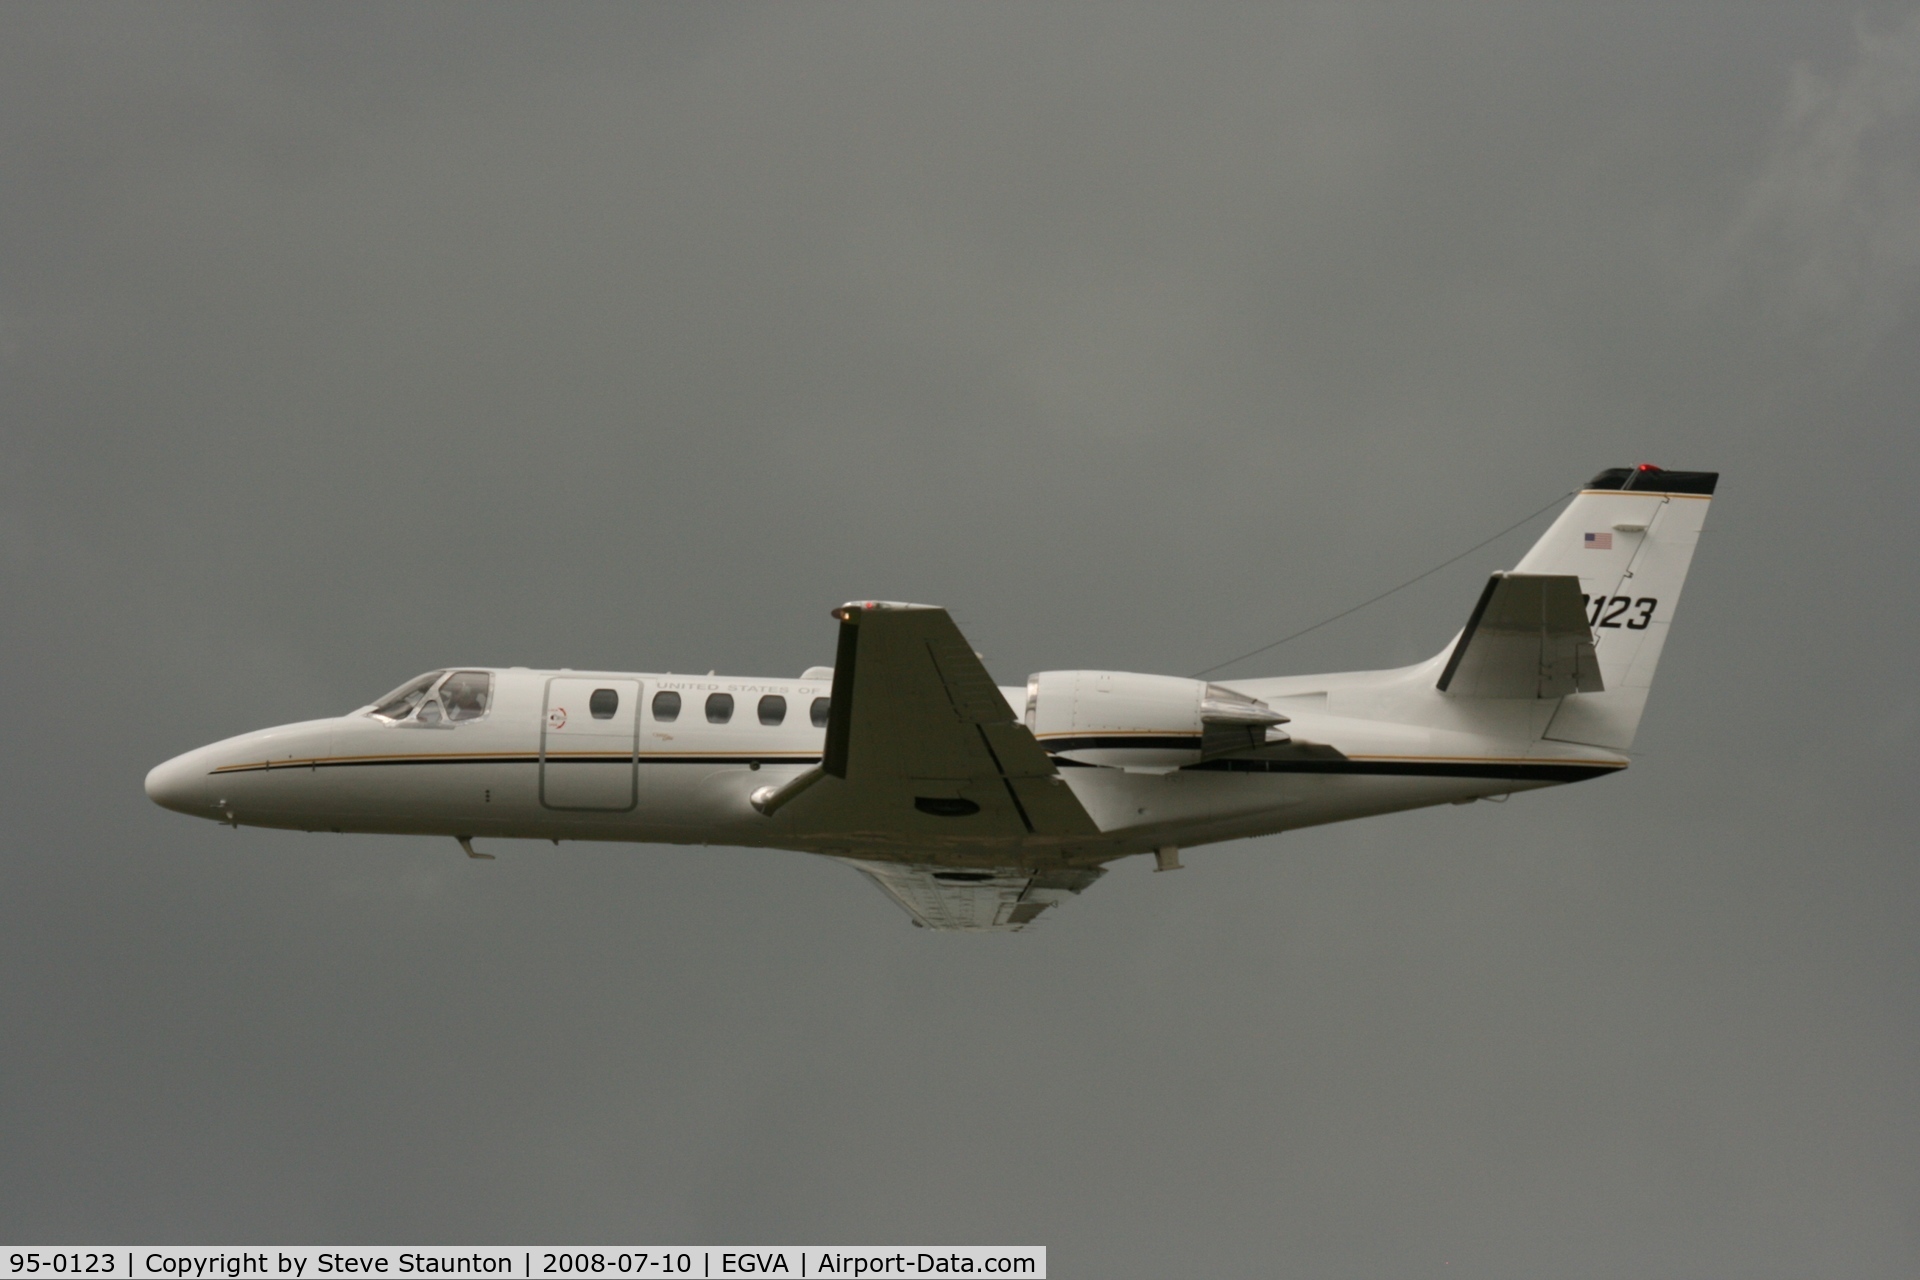 95-0123, 1995 Cessna UC-35A Citation Ultra C/N 560-0387, Taken at the Royal International Air Tattoo 2008 during arrivals and departures (show days cancelled due to bad weather)